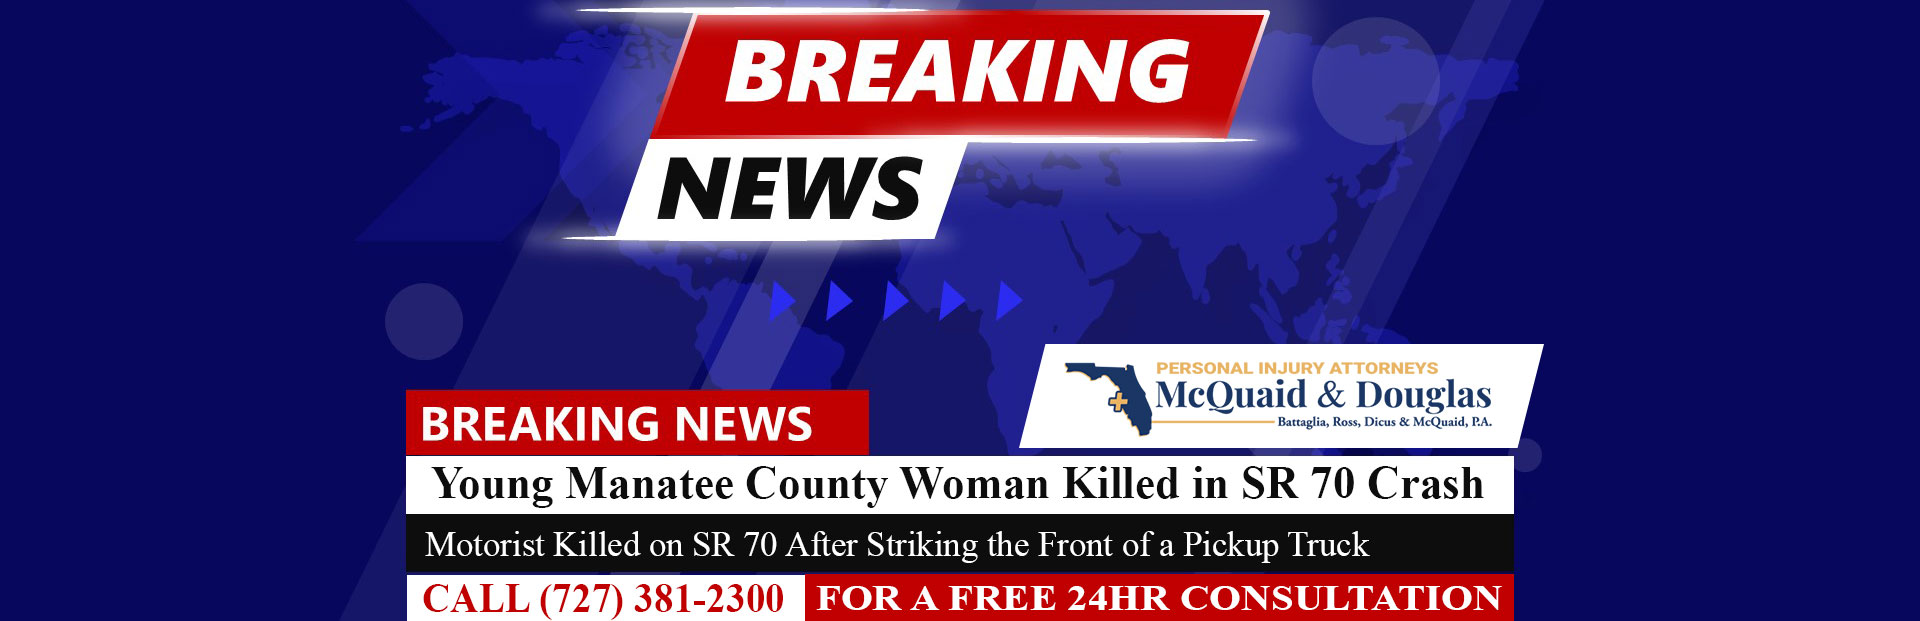 [9-19-22] Young Manatee County Woman Killed, Man Injured in SR 70 Crash